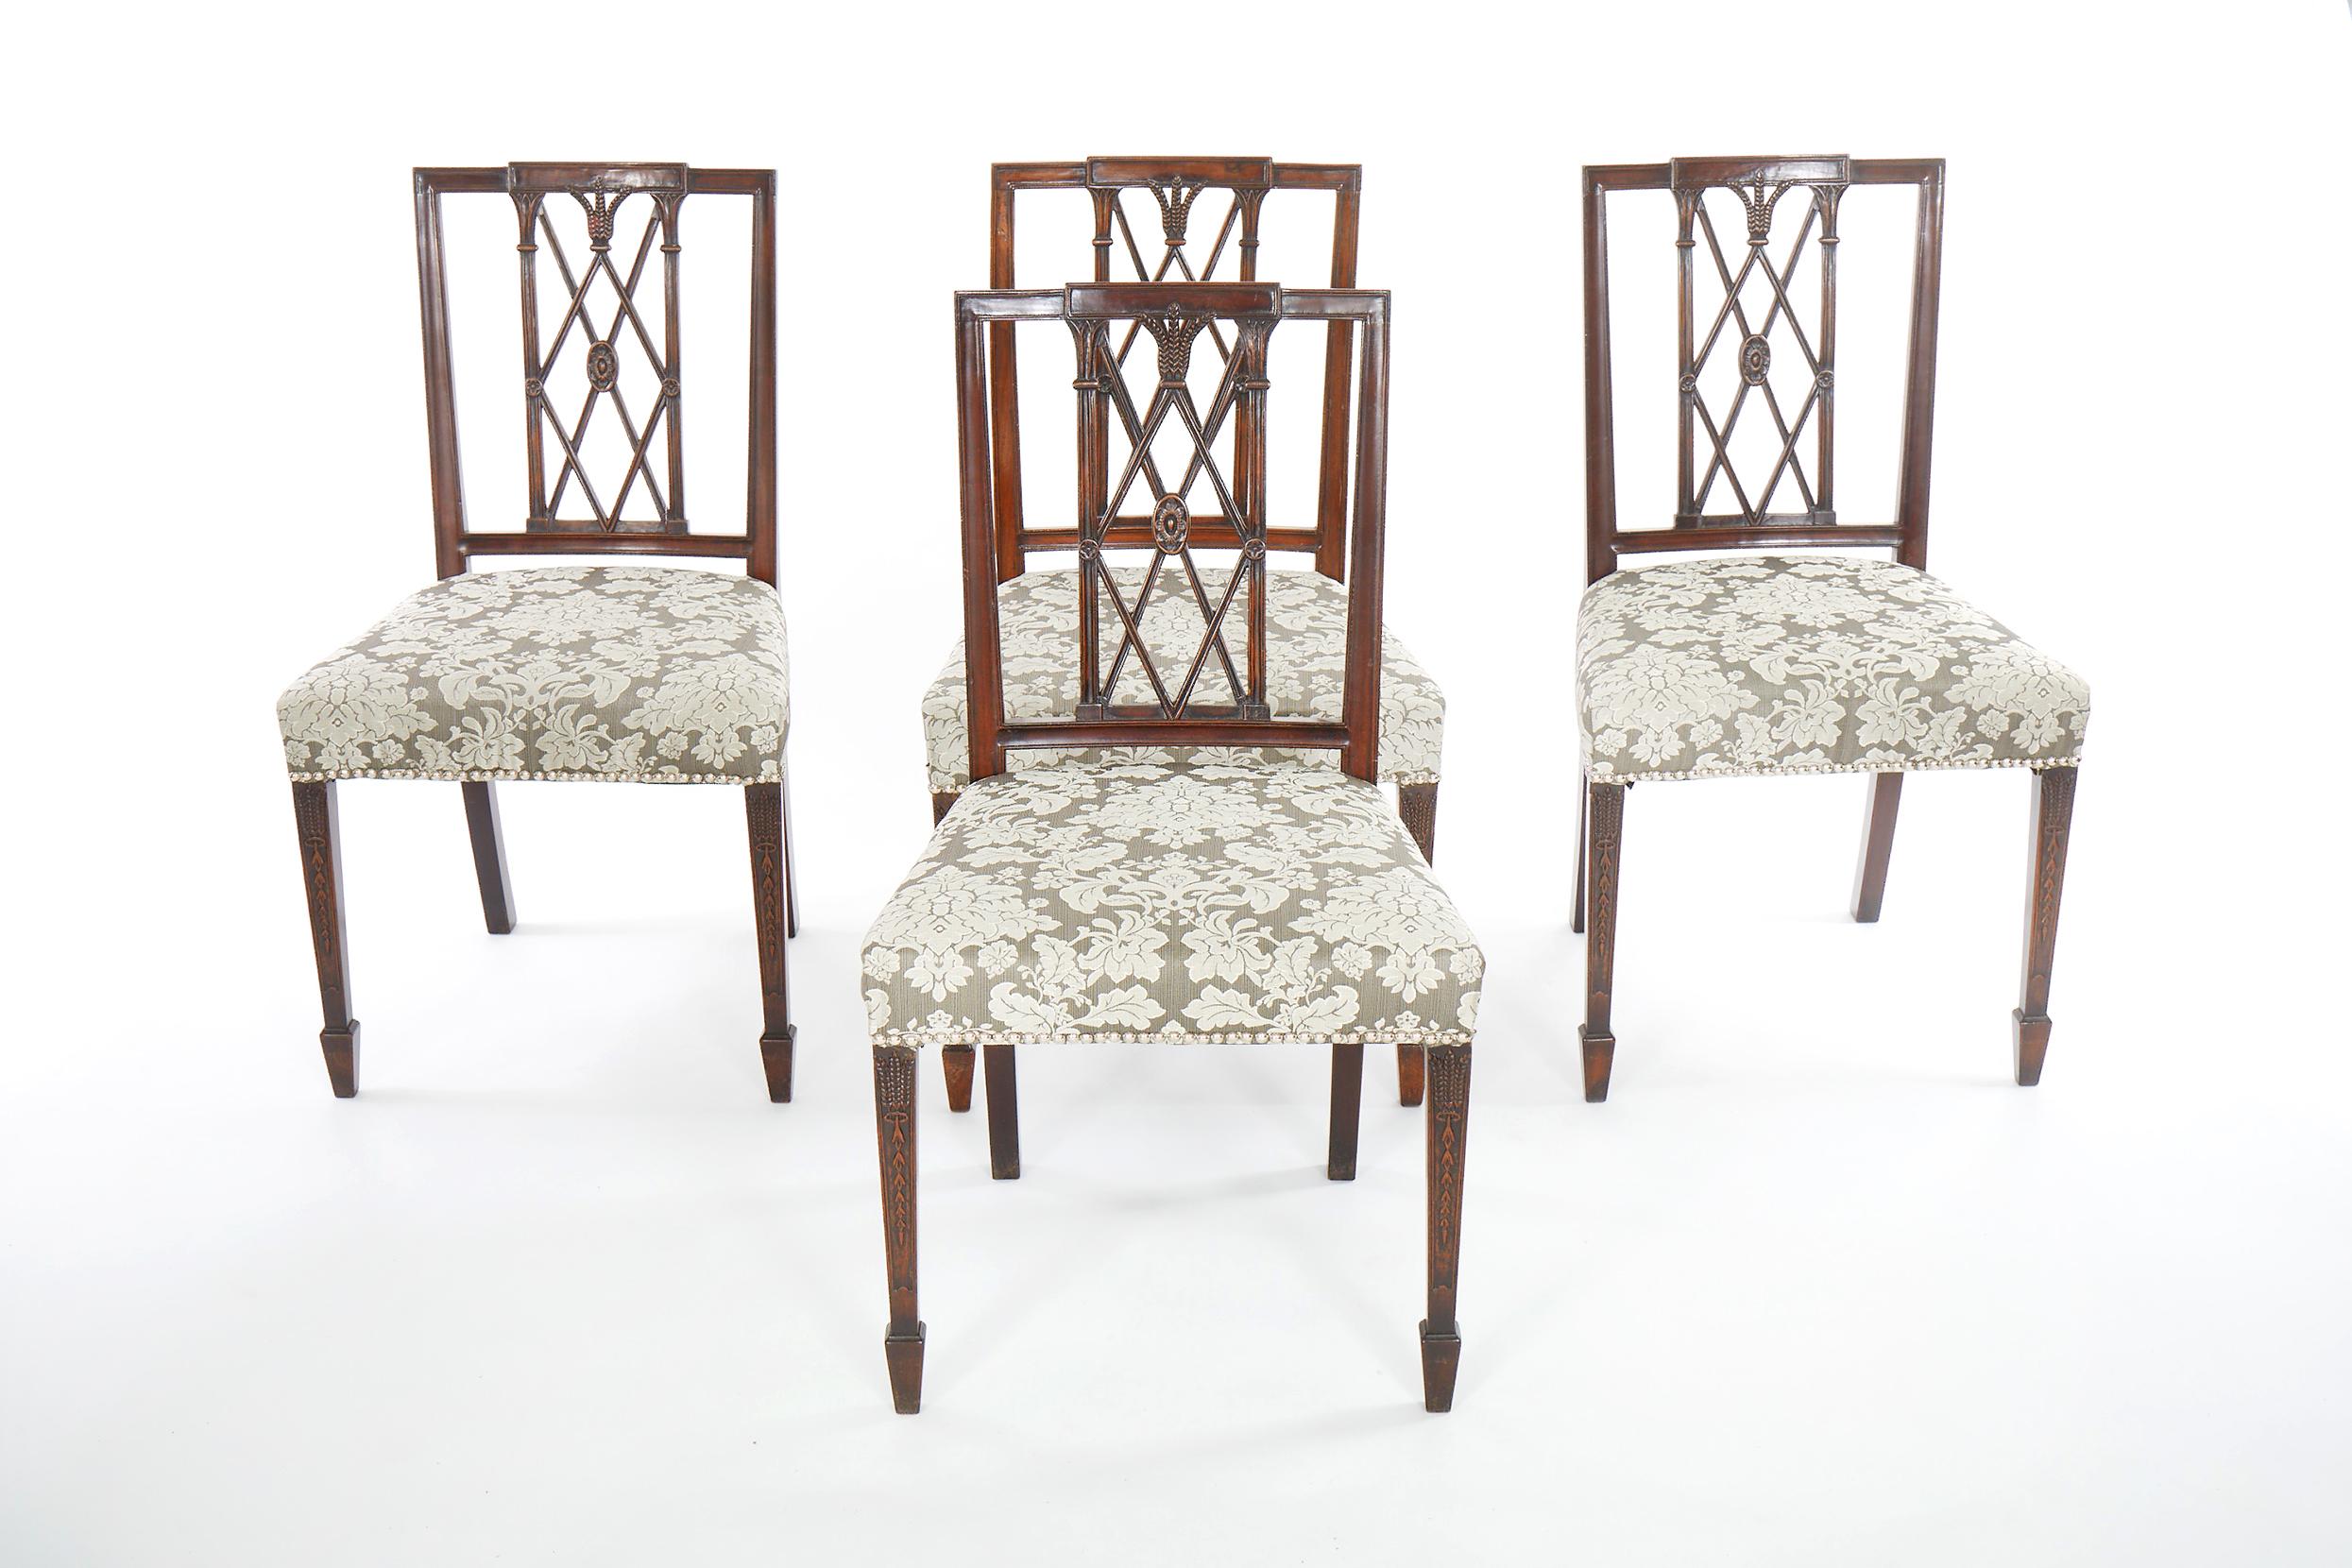 Beautifully hand craved mahogany wood Hepplewhite style dinning chairs. The set include 6 dining room chairs. Each chair is in good antique condition. Minor wear consistent with age / use. The upholstery is very immaculate. Each chair measures about